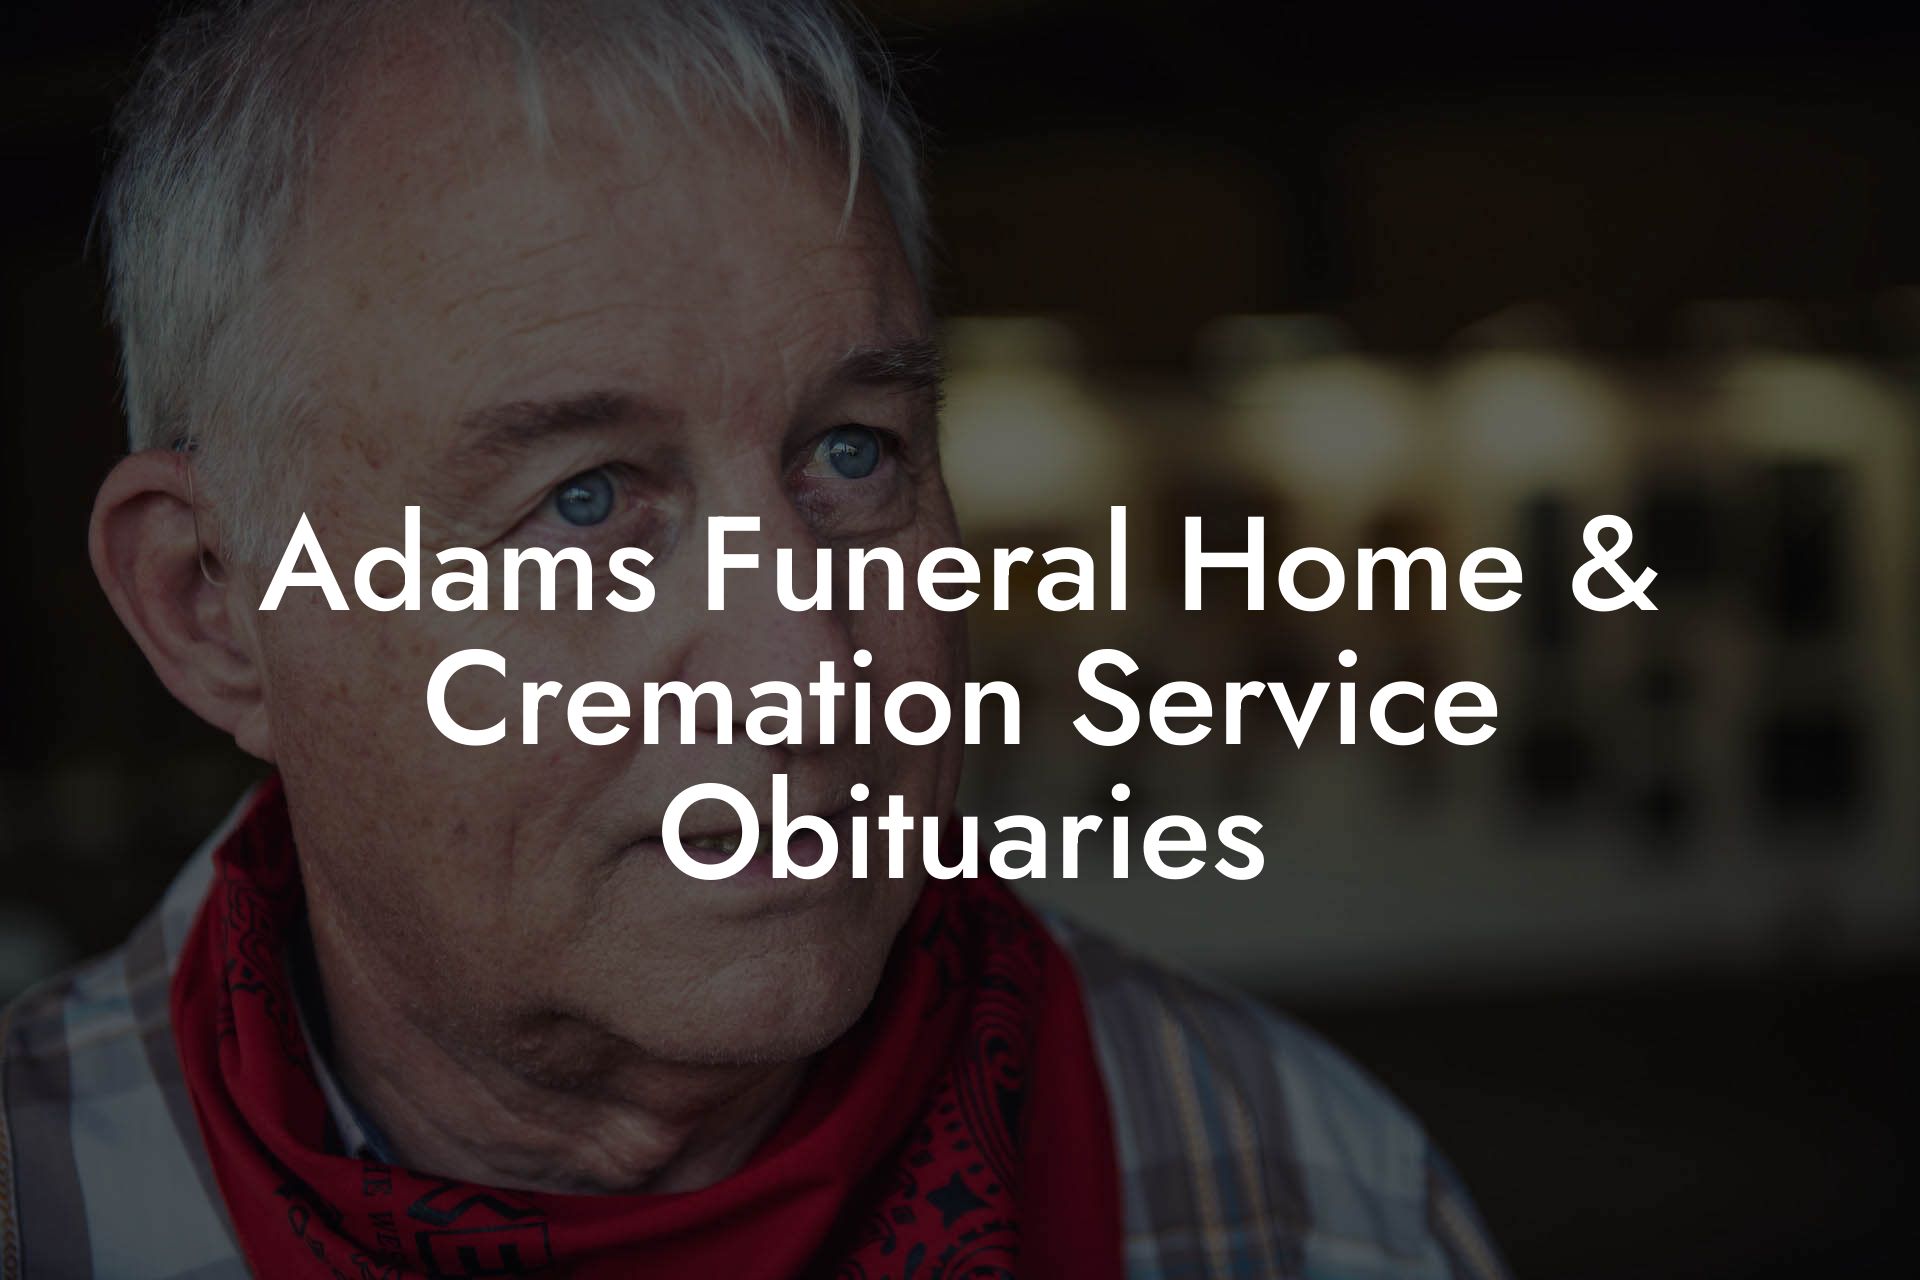 Adams Funeral Home & Cremation Service Obituaries